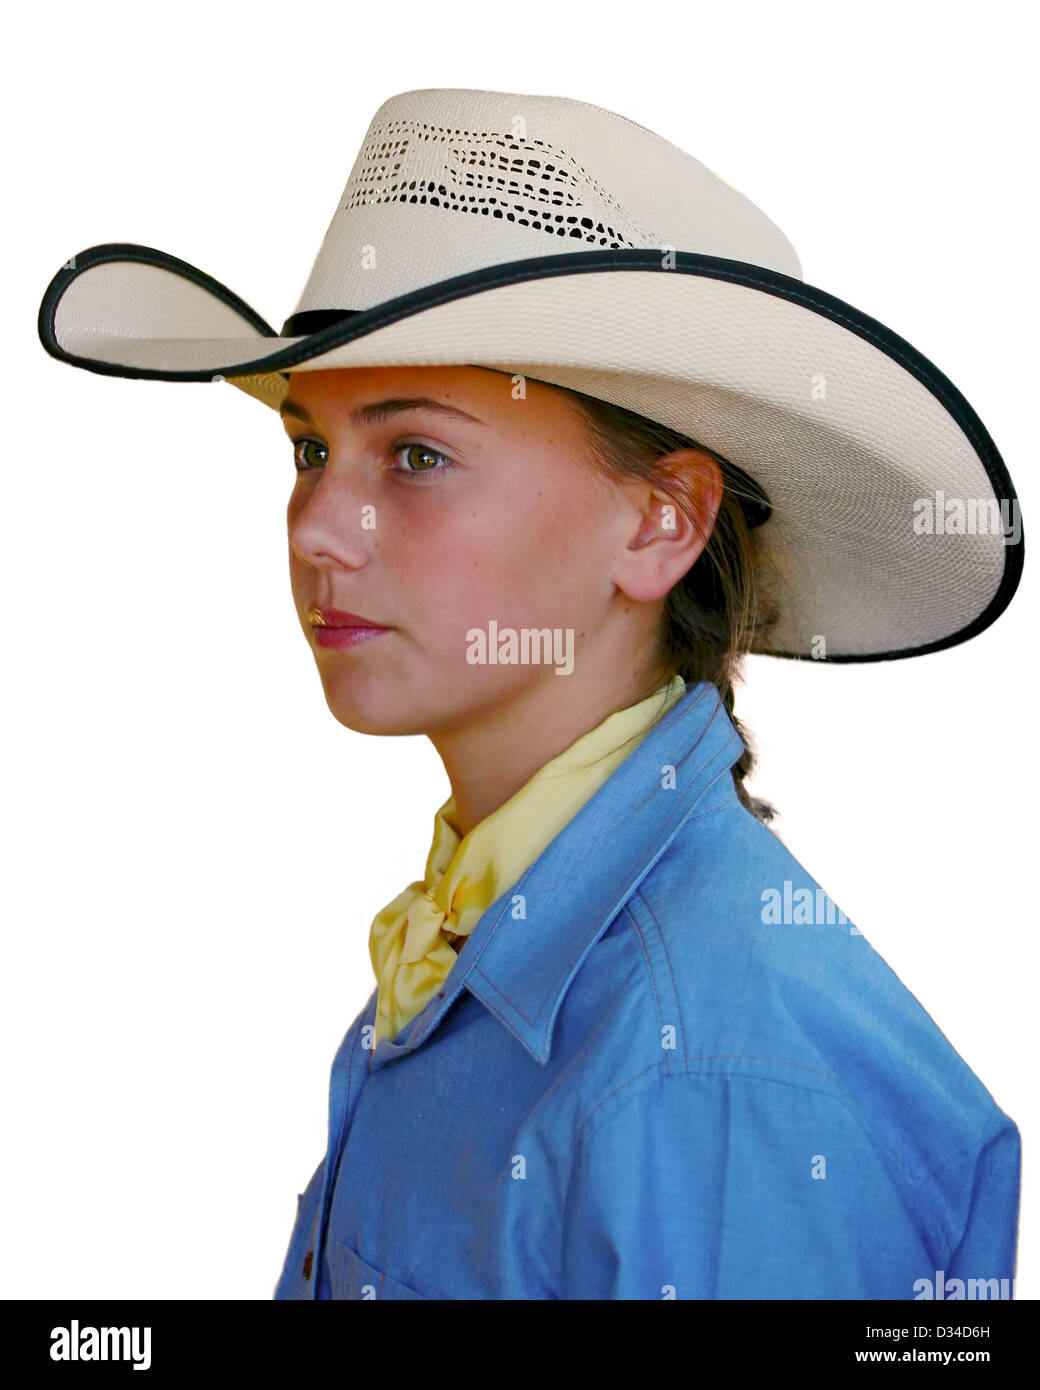 isolated image of young cowgirl Stock Photo